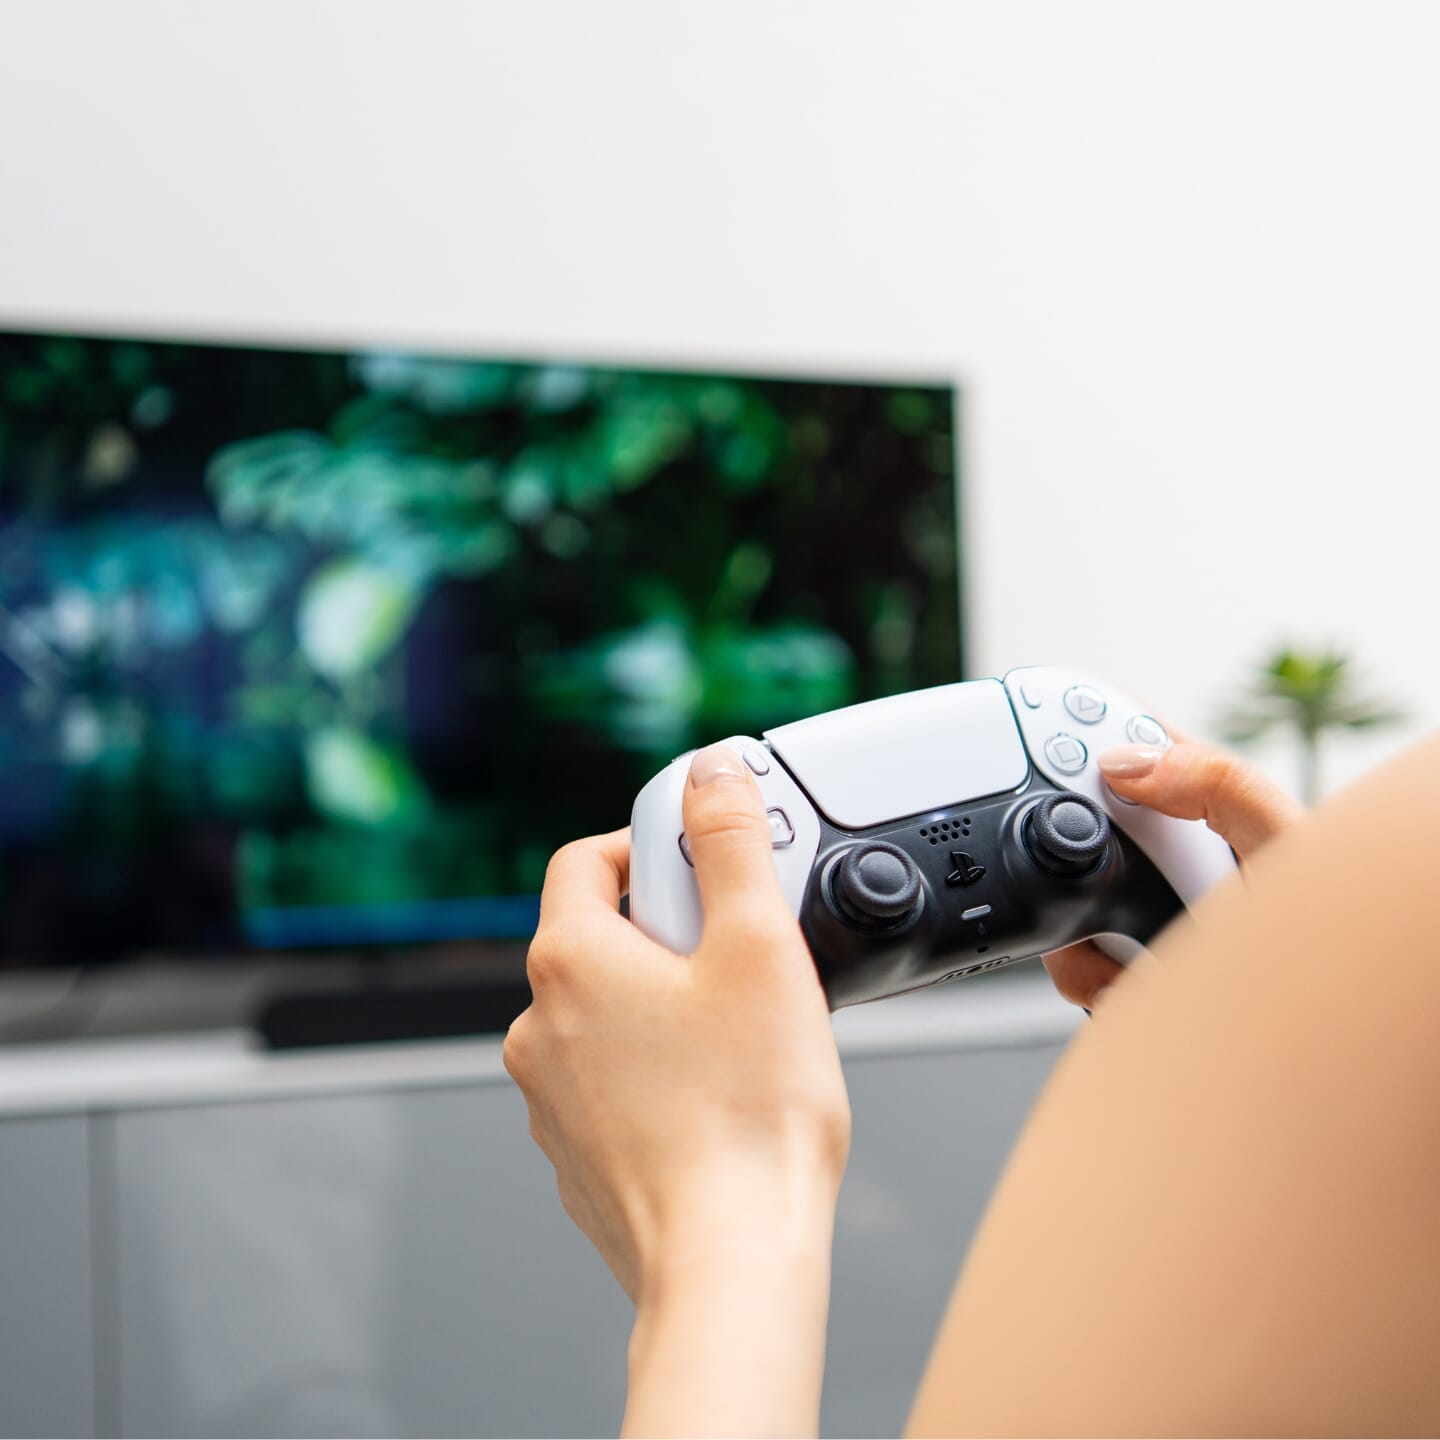 When it comes to gaming, lag is a no go. Find the best TVs for your next session.